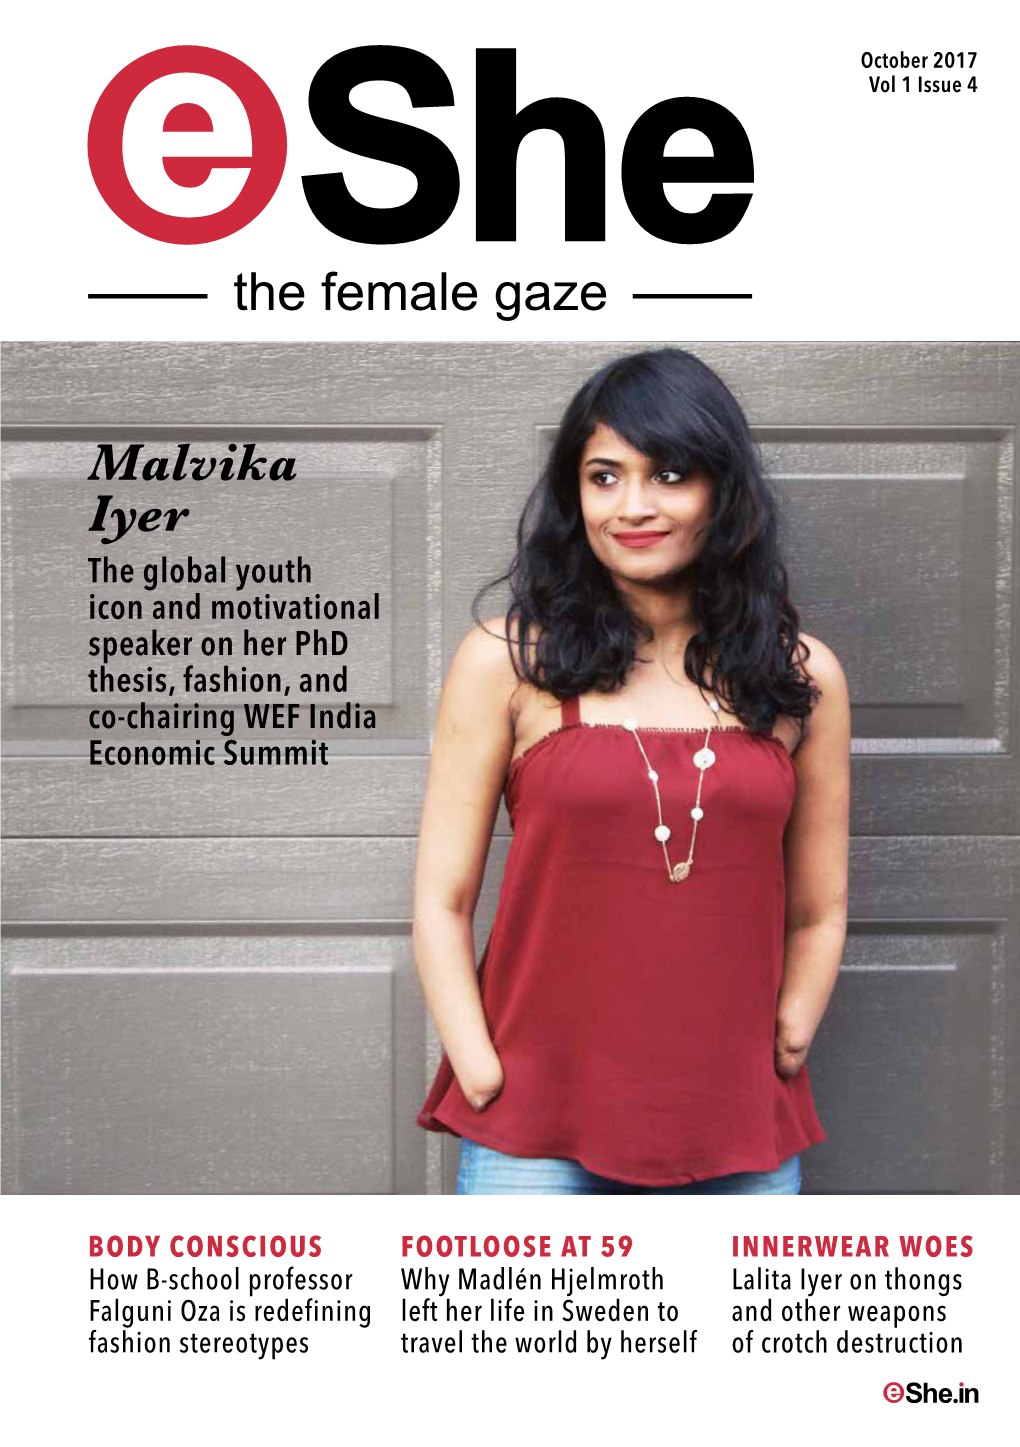 Malvika Iyer the Global Youth Icon and Motivational Speaker on Her Phd Thesis, Fashion, and Co-Chairing WEF India Economic Summit